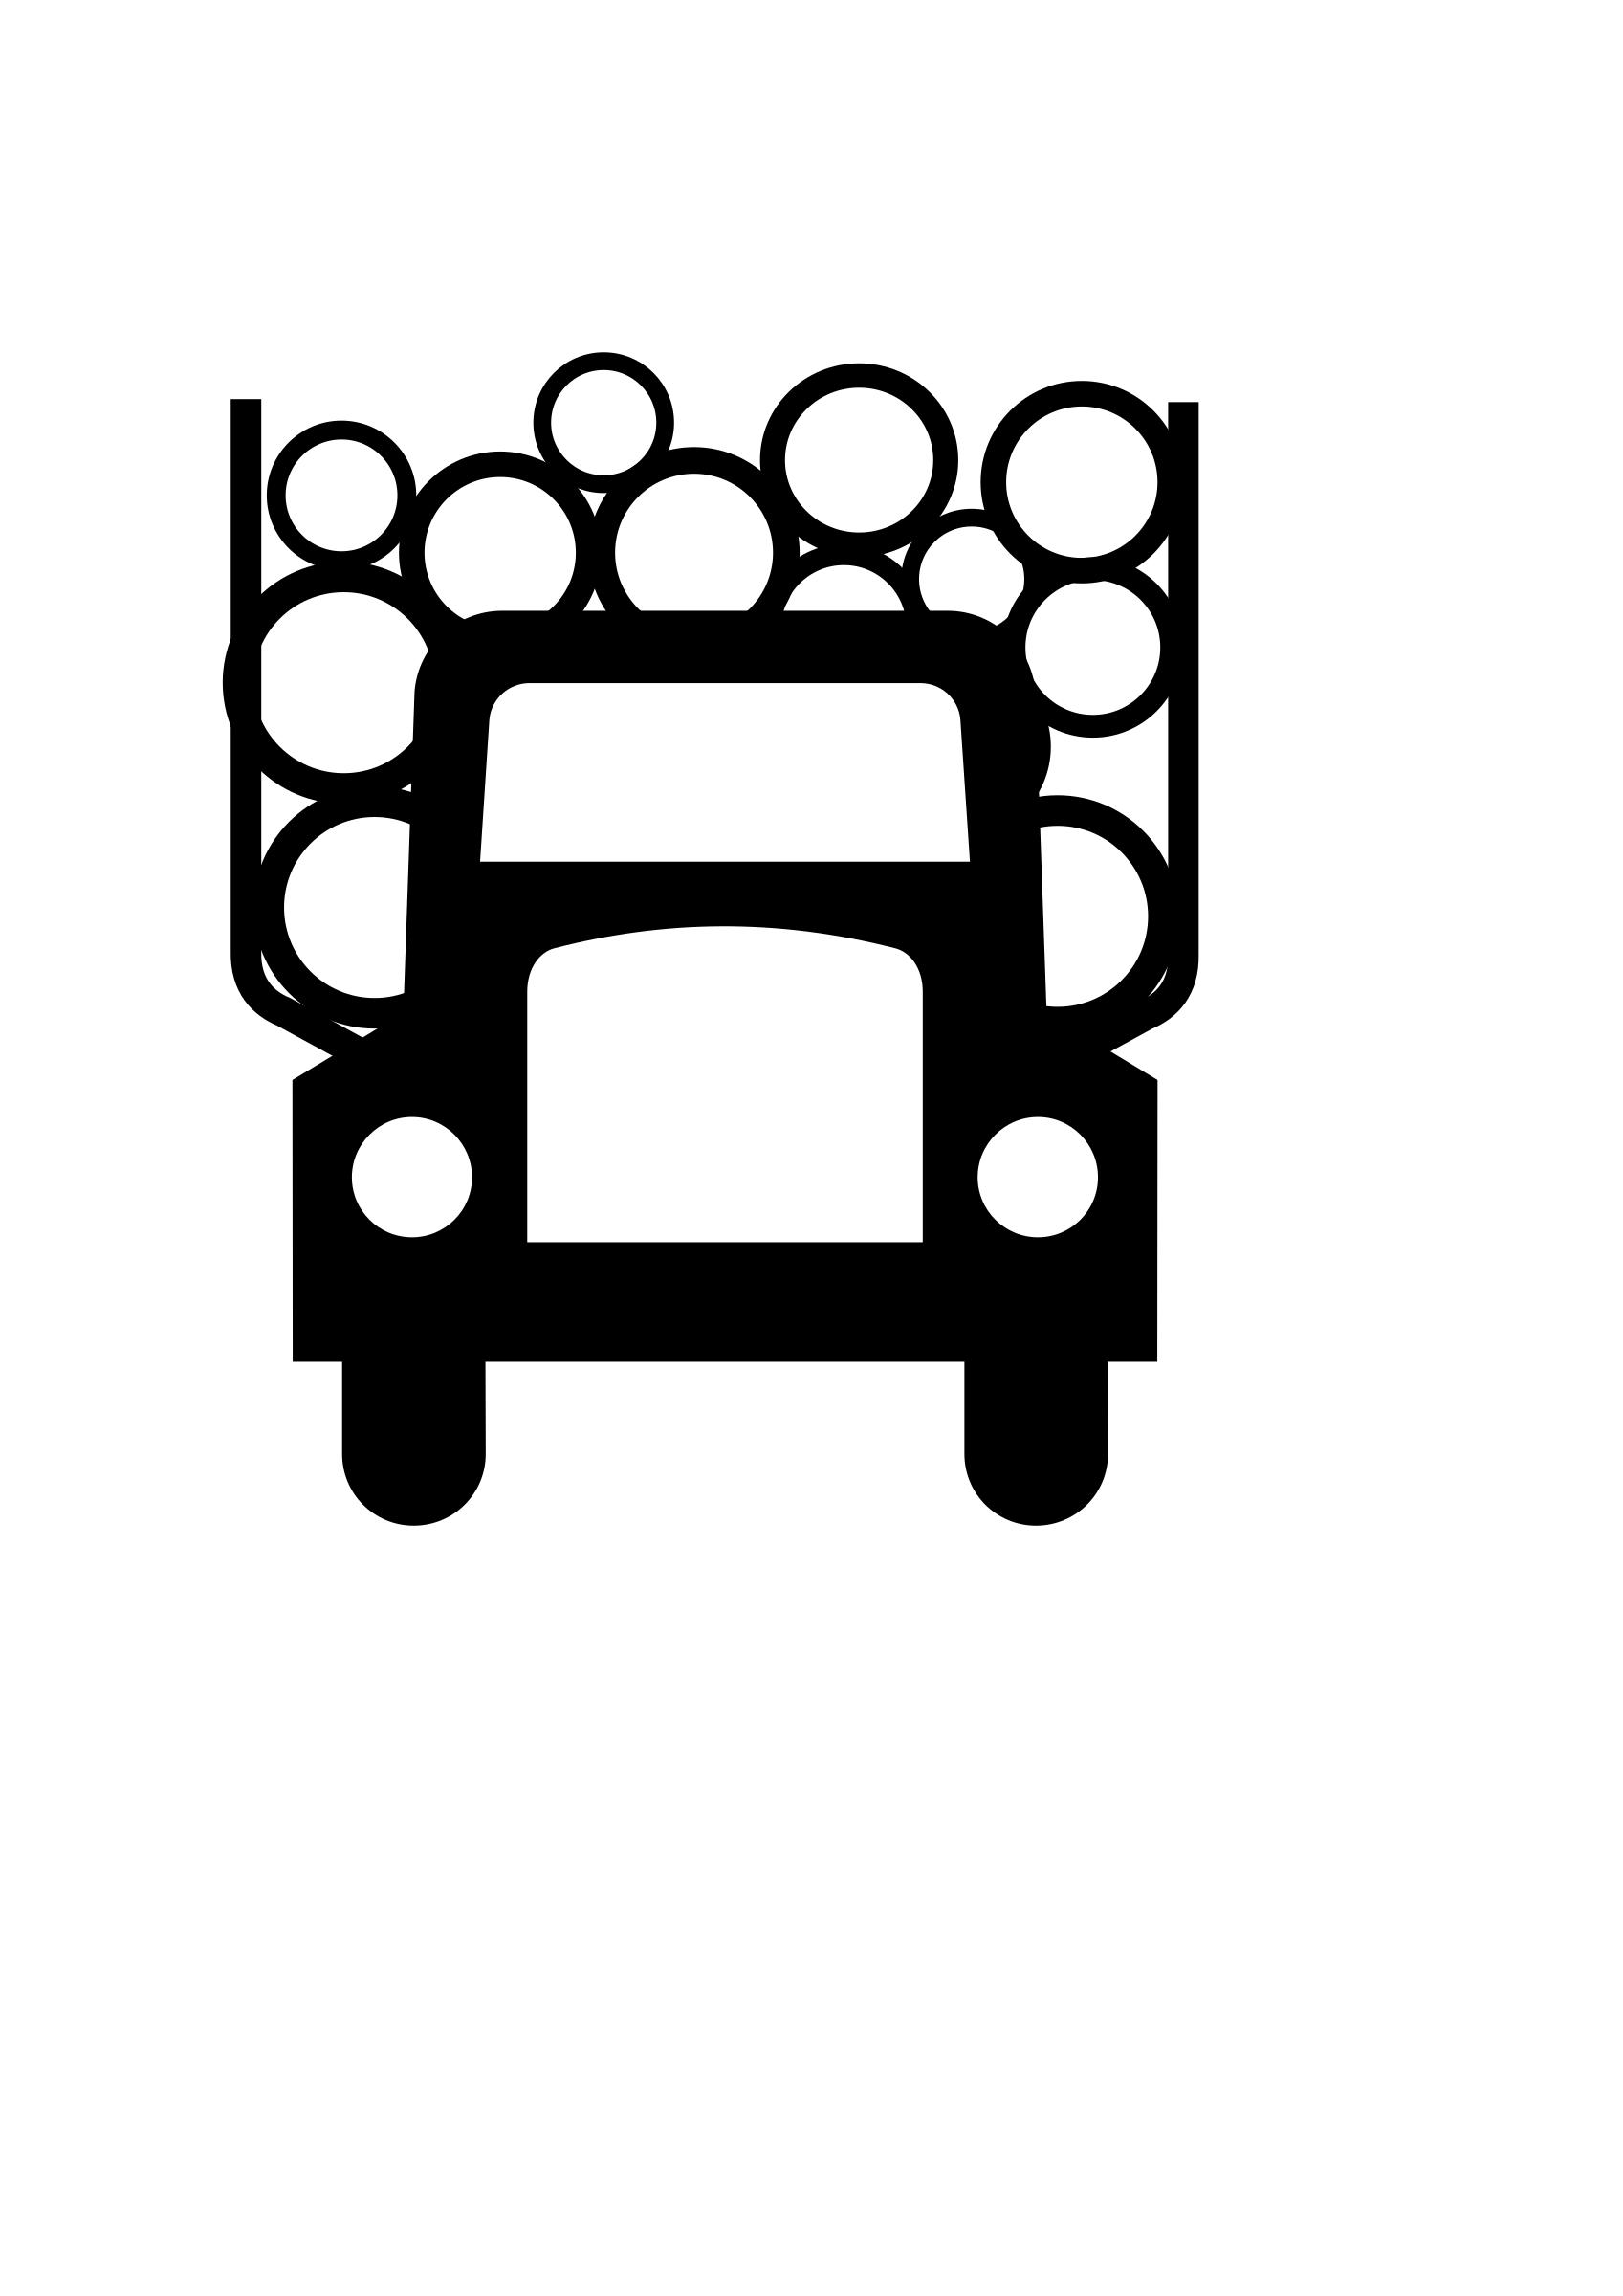 Logging Truck symbol or sign PNG icons